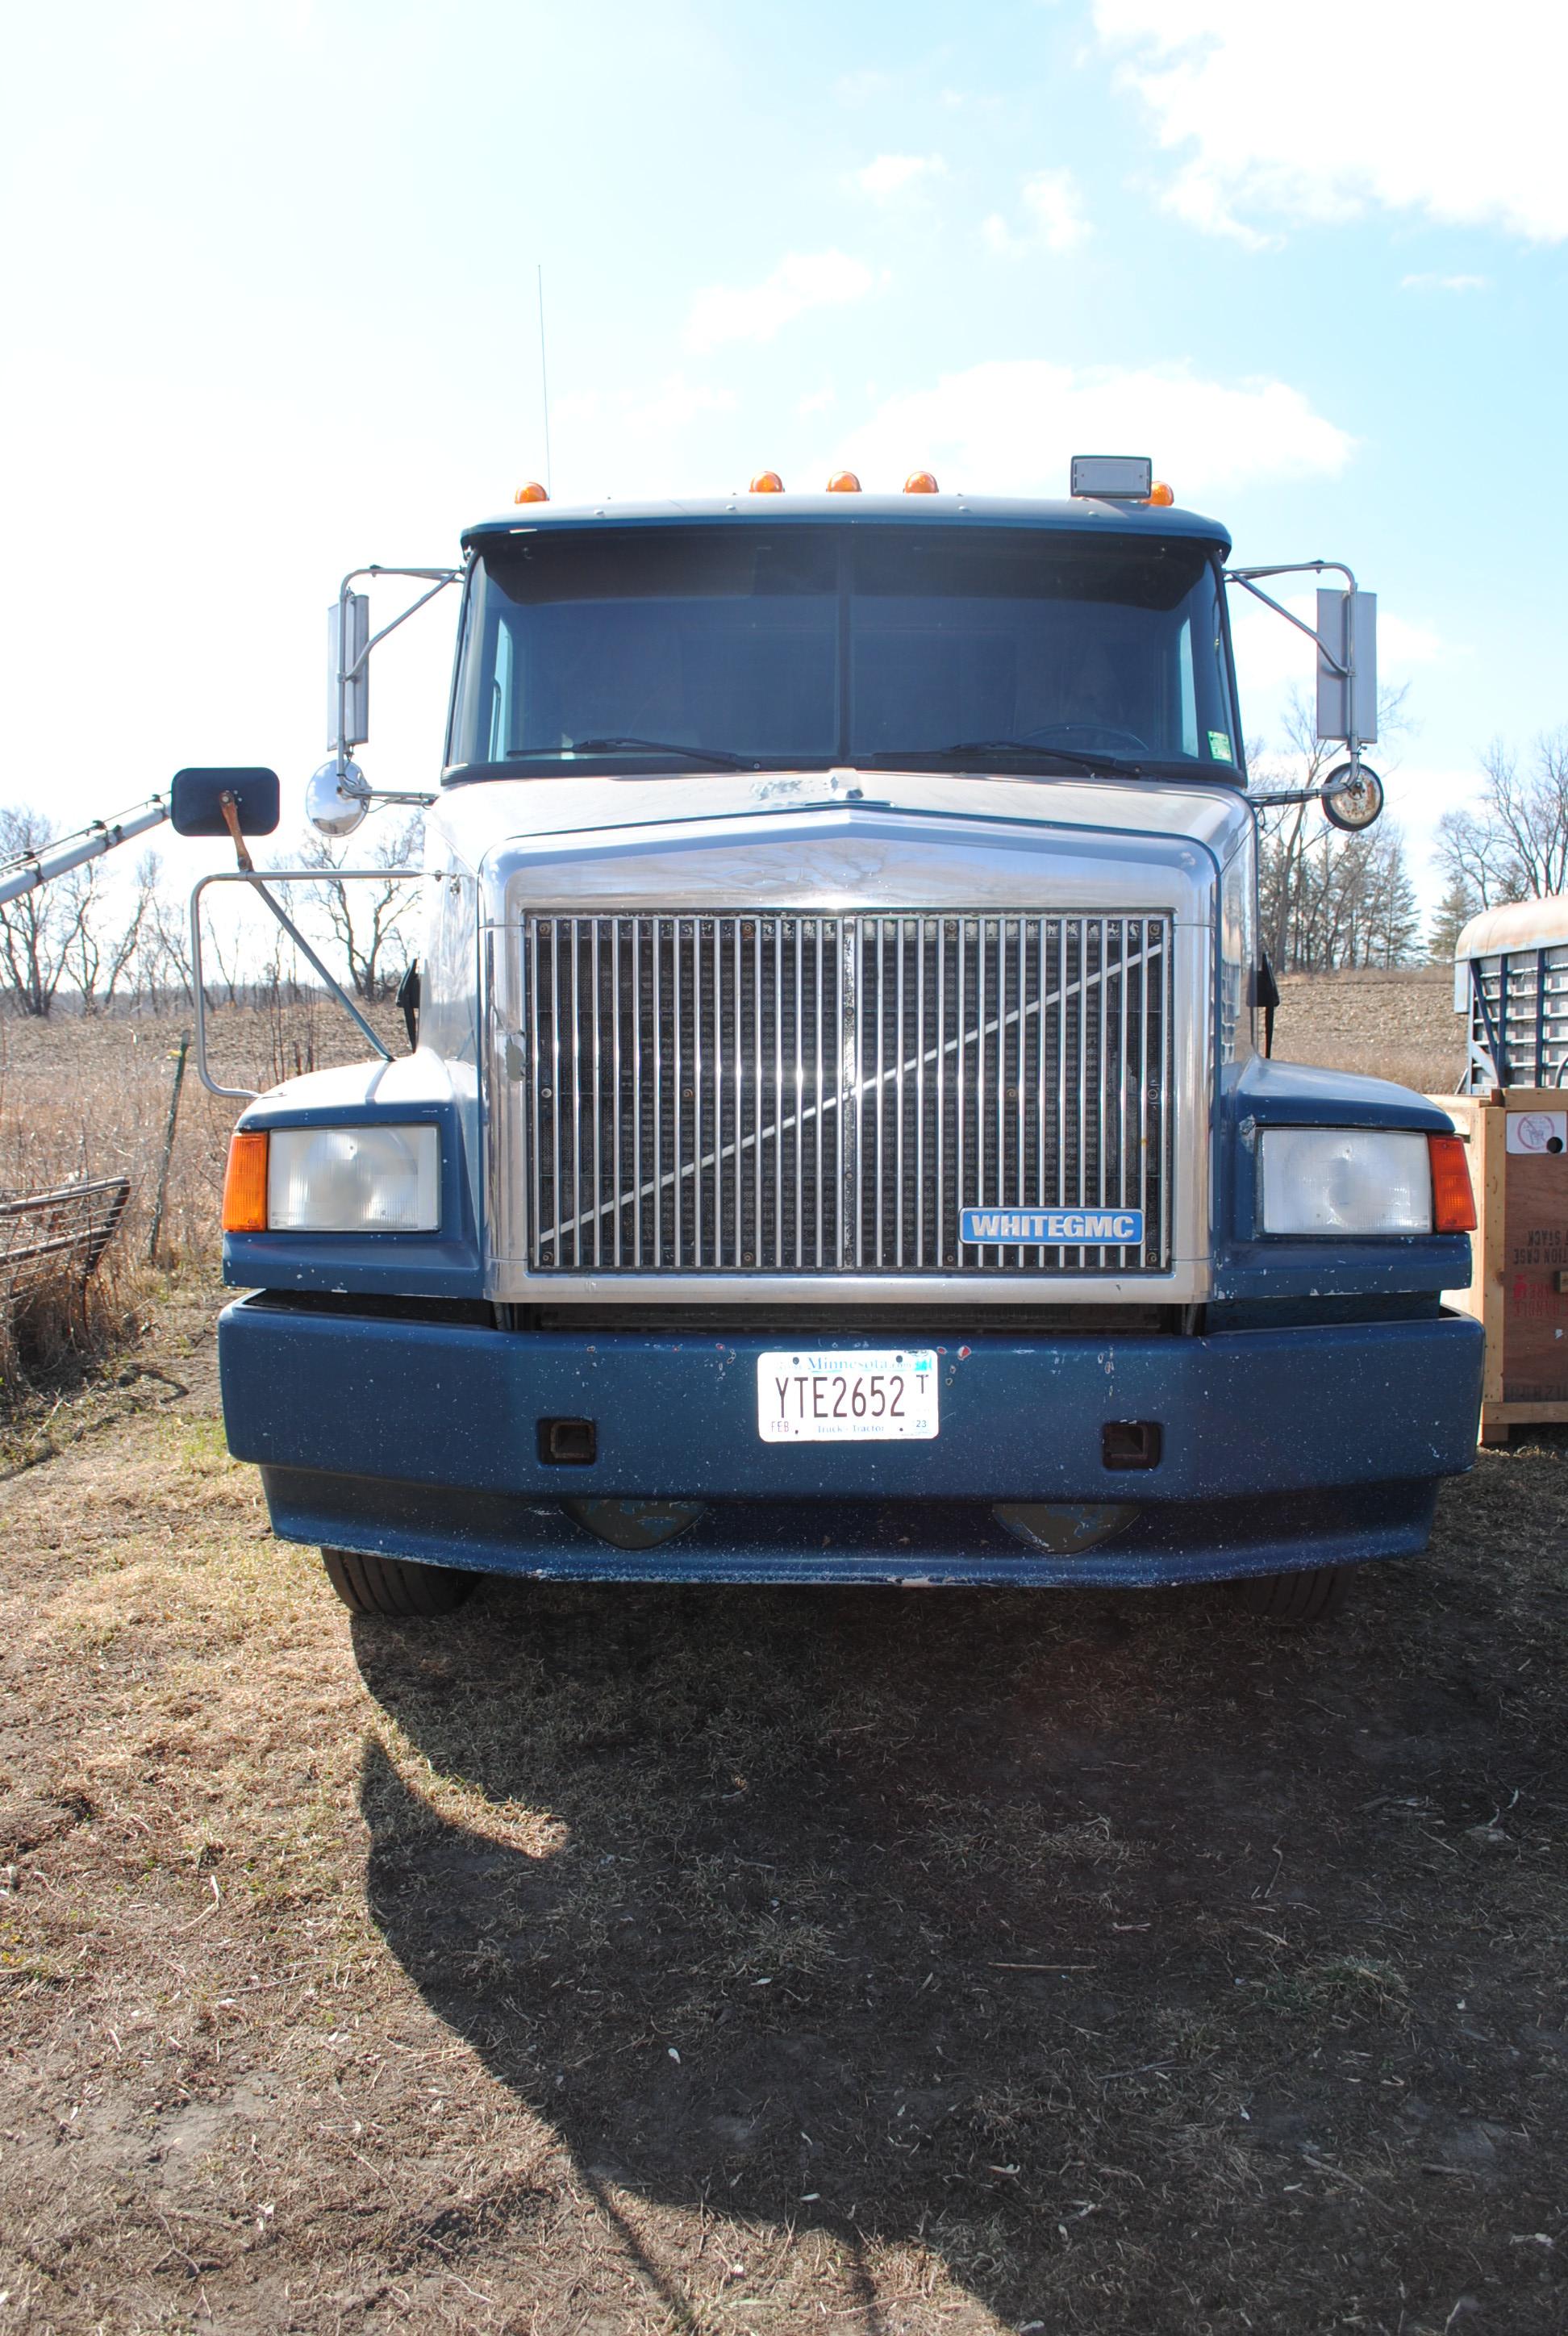 1992 White GMC Volvo Semi Tractor, 3176 CAT 335HP engine with 660,000 miles, air slide 5th wheel, ap